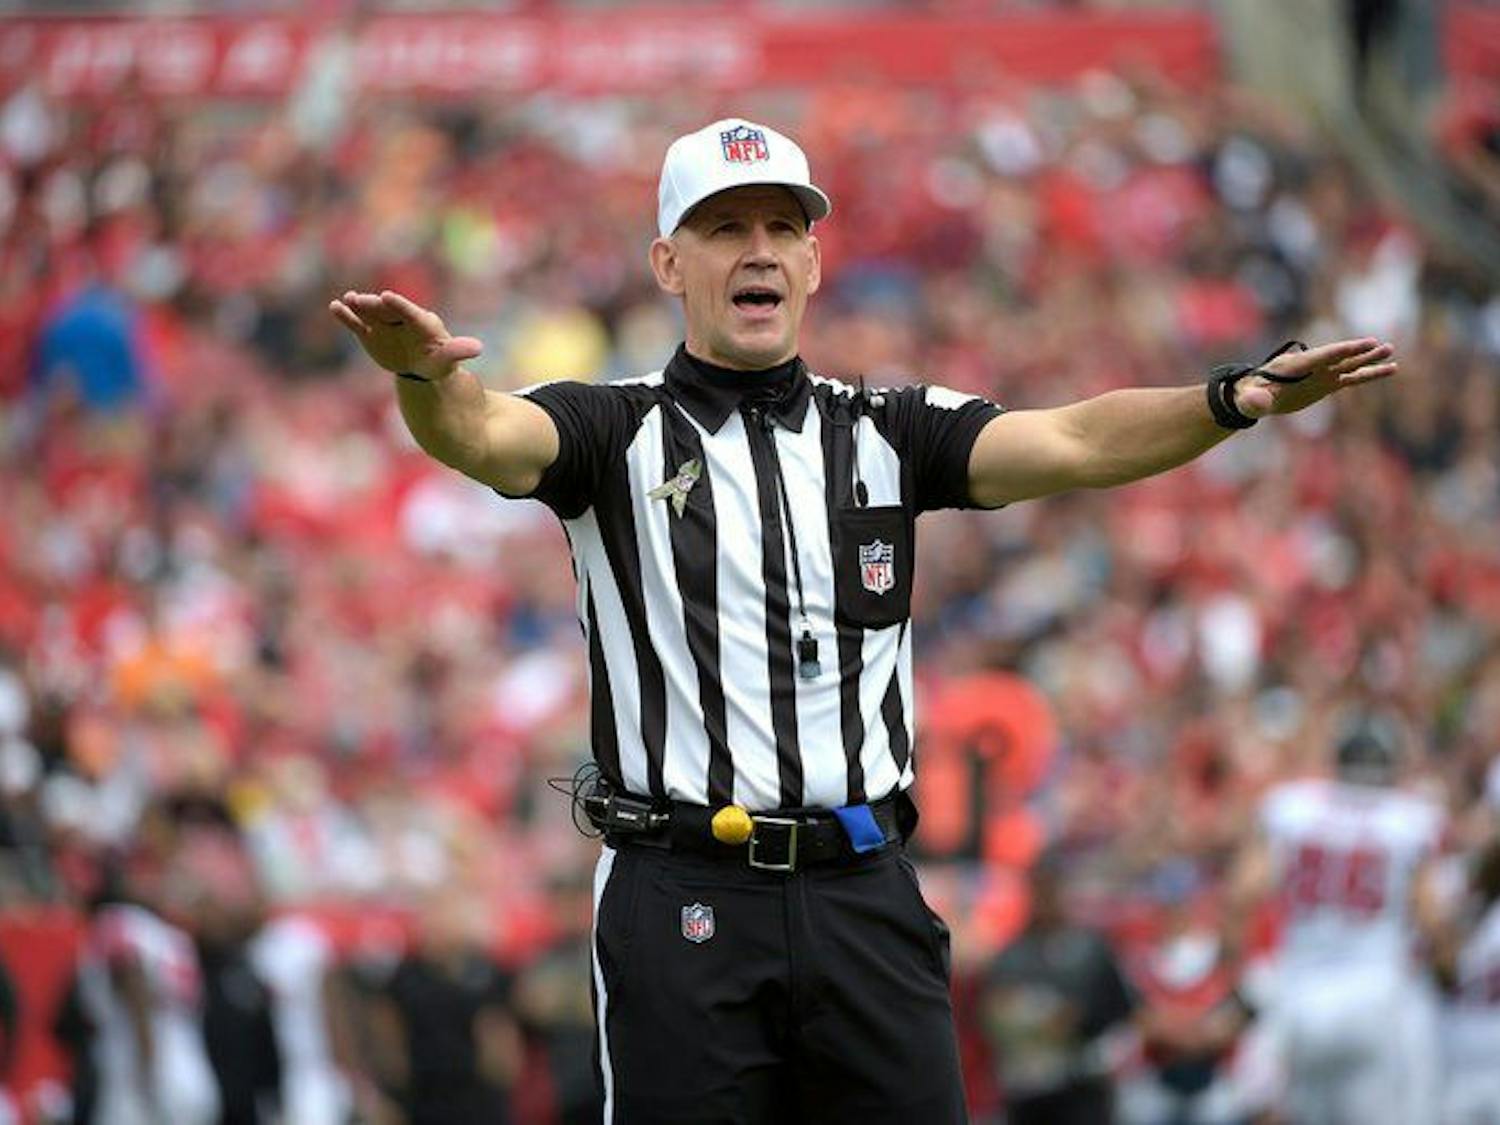 Game officials owe the world a personal explanation for some calls.&nbsp;